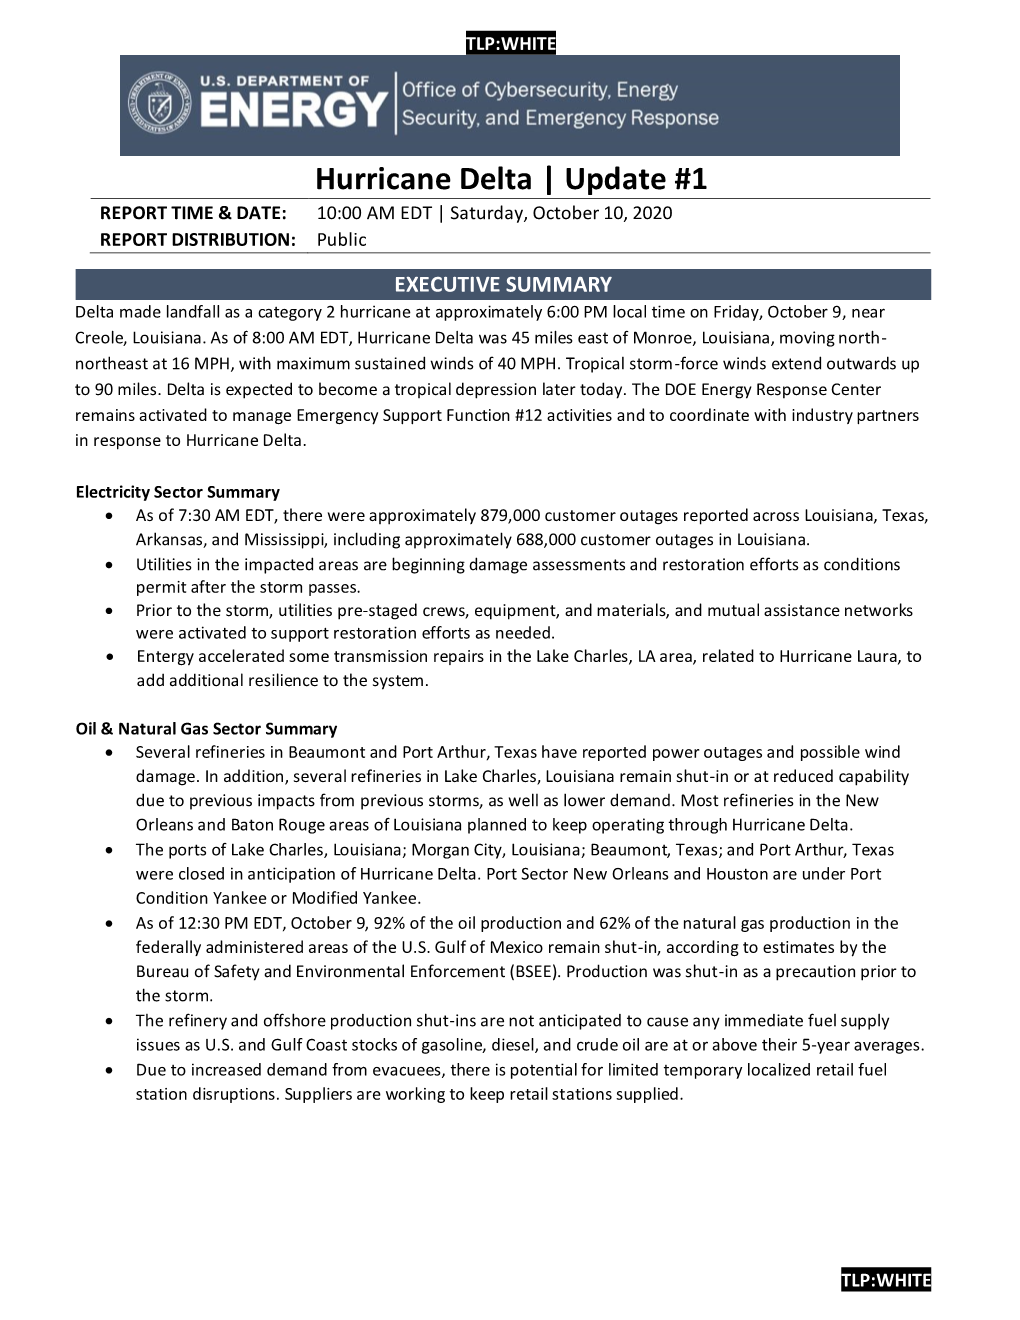 DOE Situation Report for Hurricane Delta